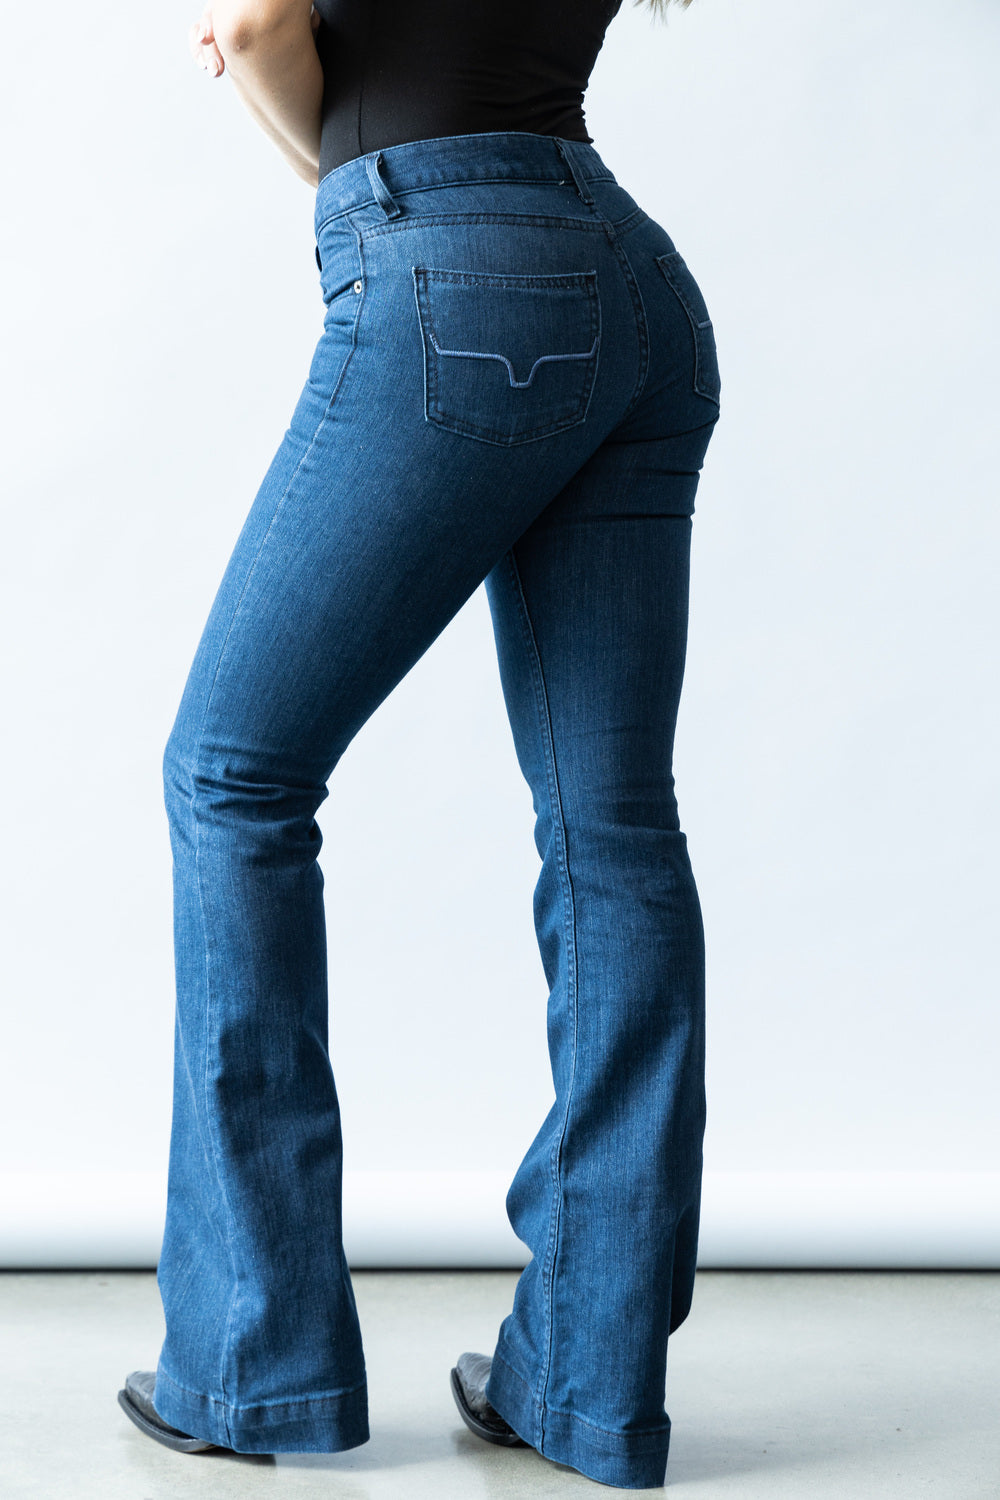 Lola Flare Jeans by Kimes – TGC Brands